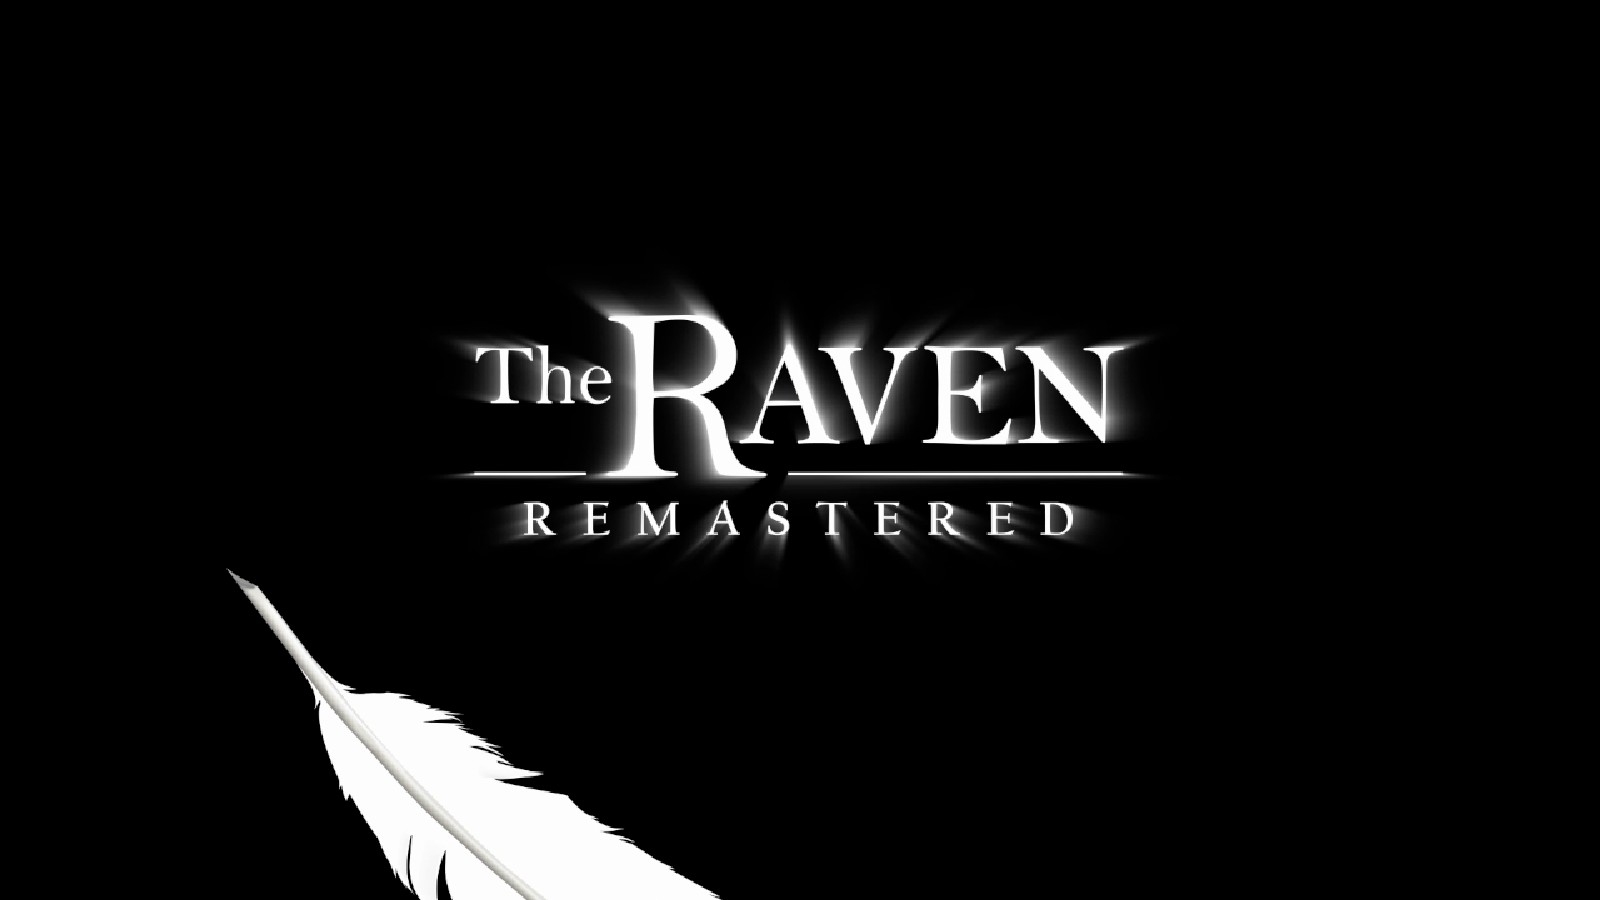 The ravens are the unique guardians. The Raven Remastered game. The Raven King обложка. Shadow of the Raven 1988 обложка. The Raven age.